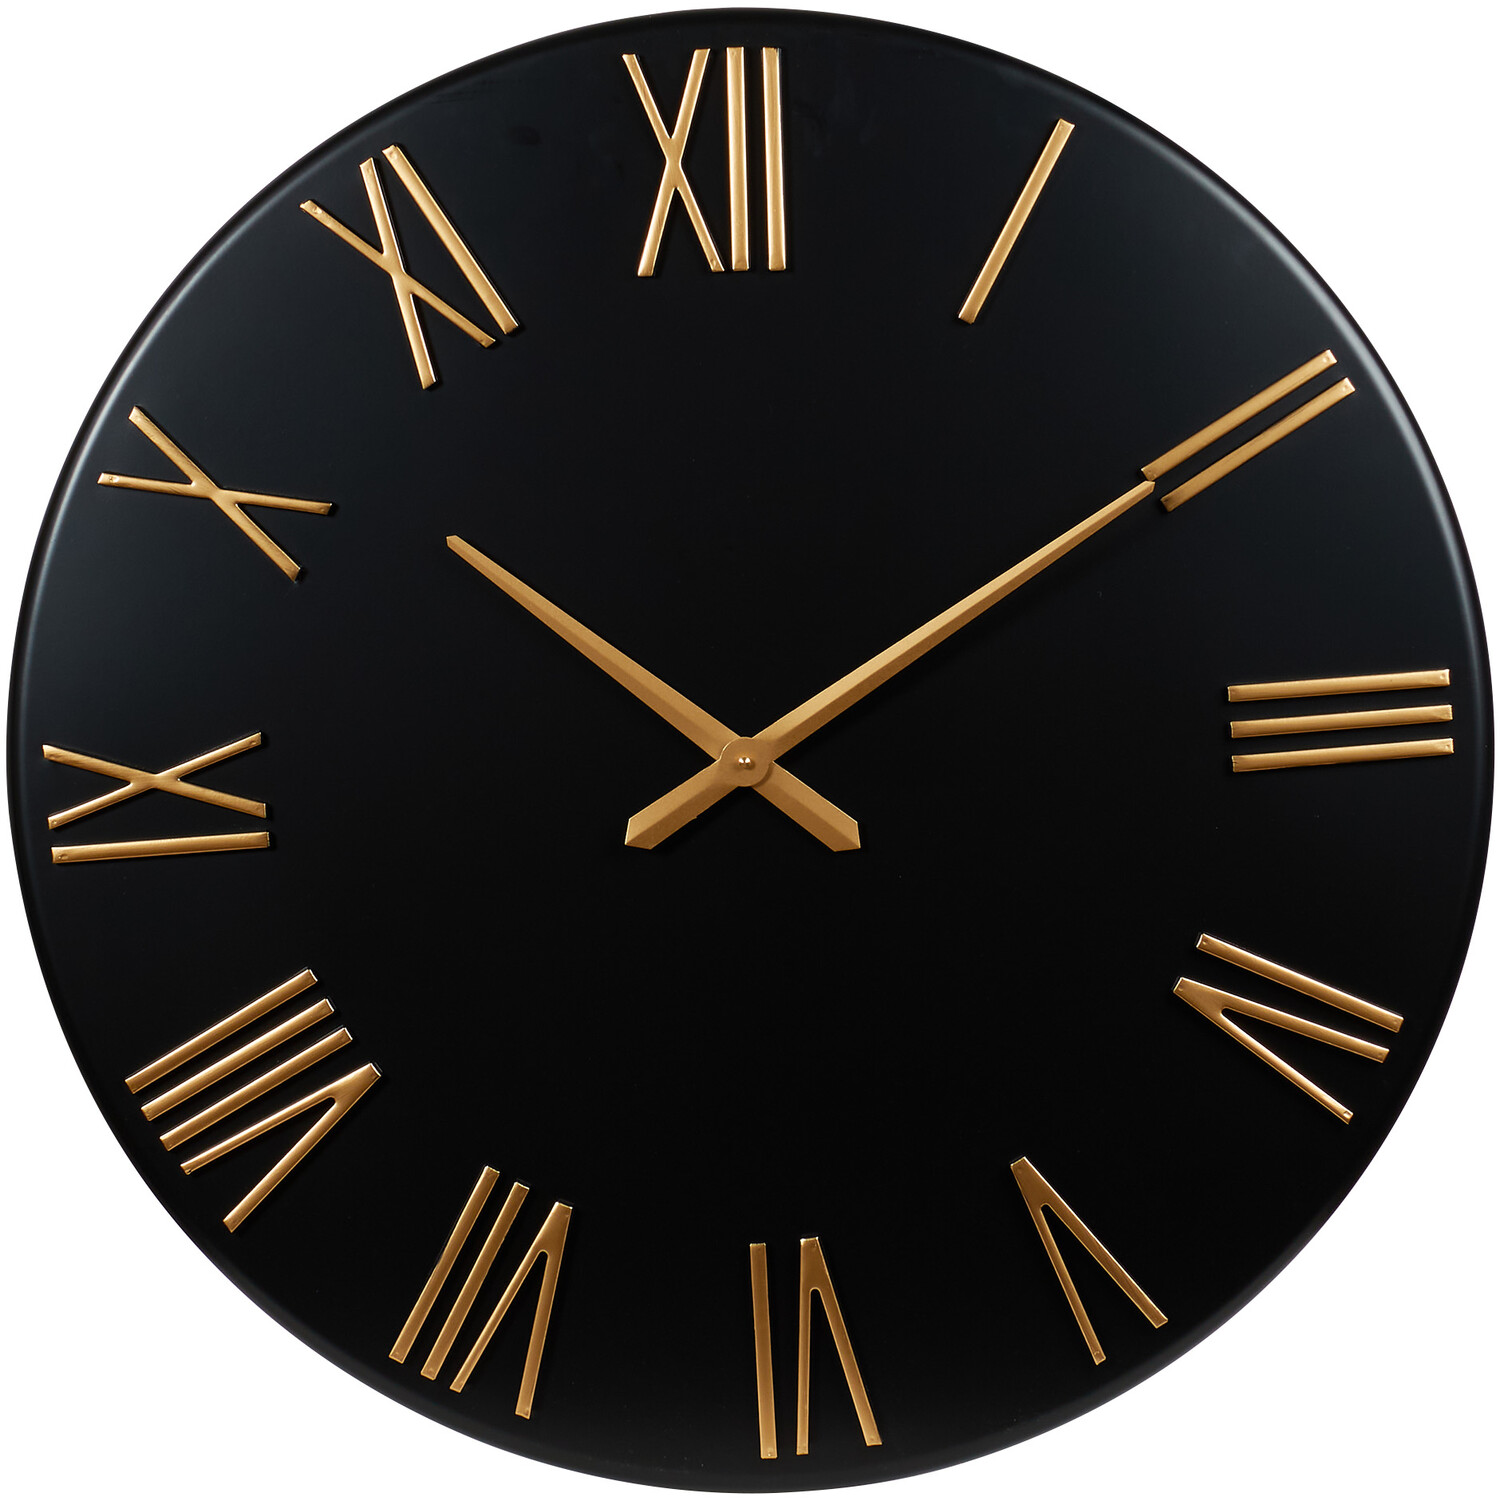 Black and Gold Roman Numeral Wall Clock Image 1